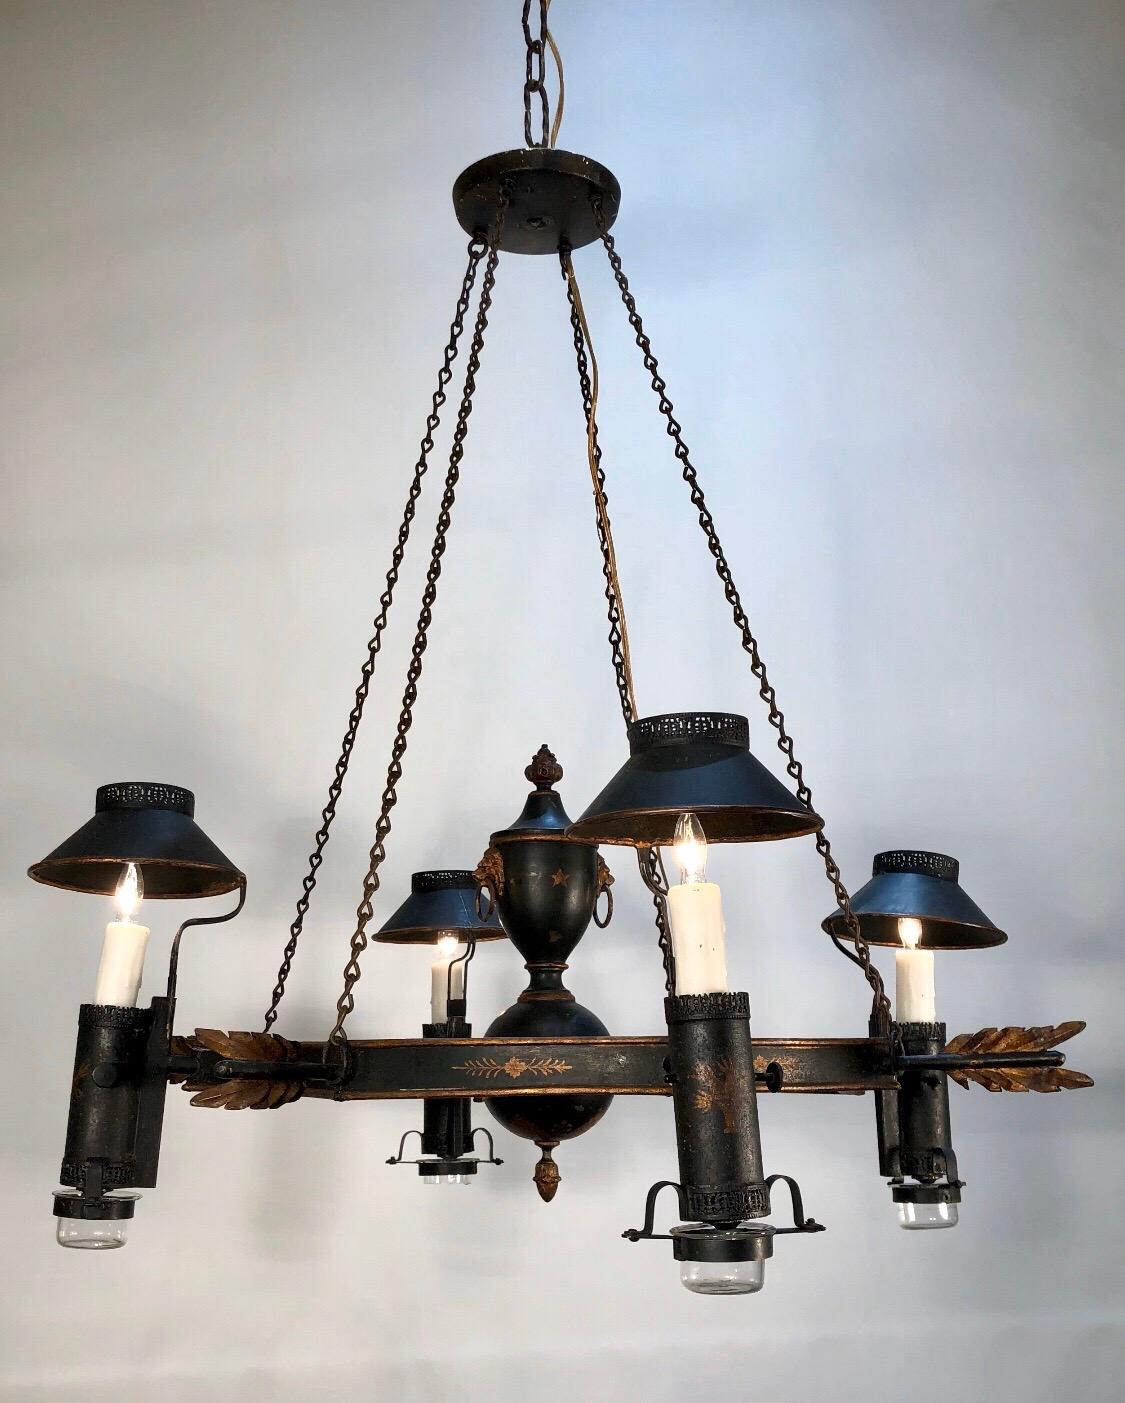 French neoclassical tole arrow chandelier decorated in dark green paint with original gilt stenciling has some of the finest tole details in the tole work. This Classic Regency form chandelier has four lights with tole smoke shades and was made in